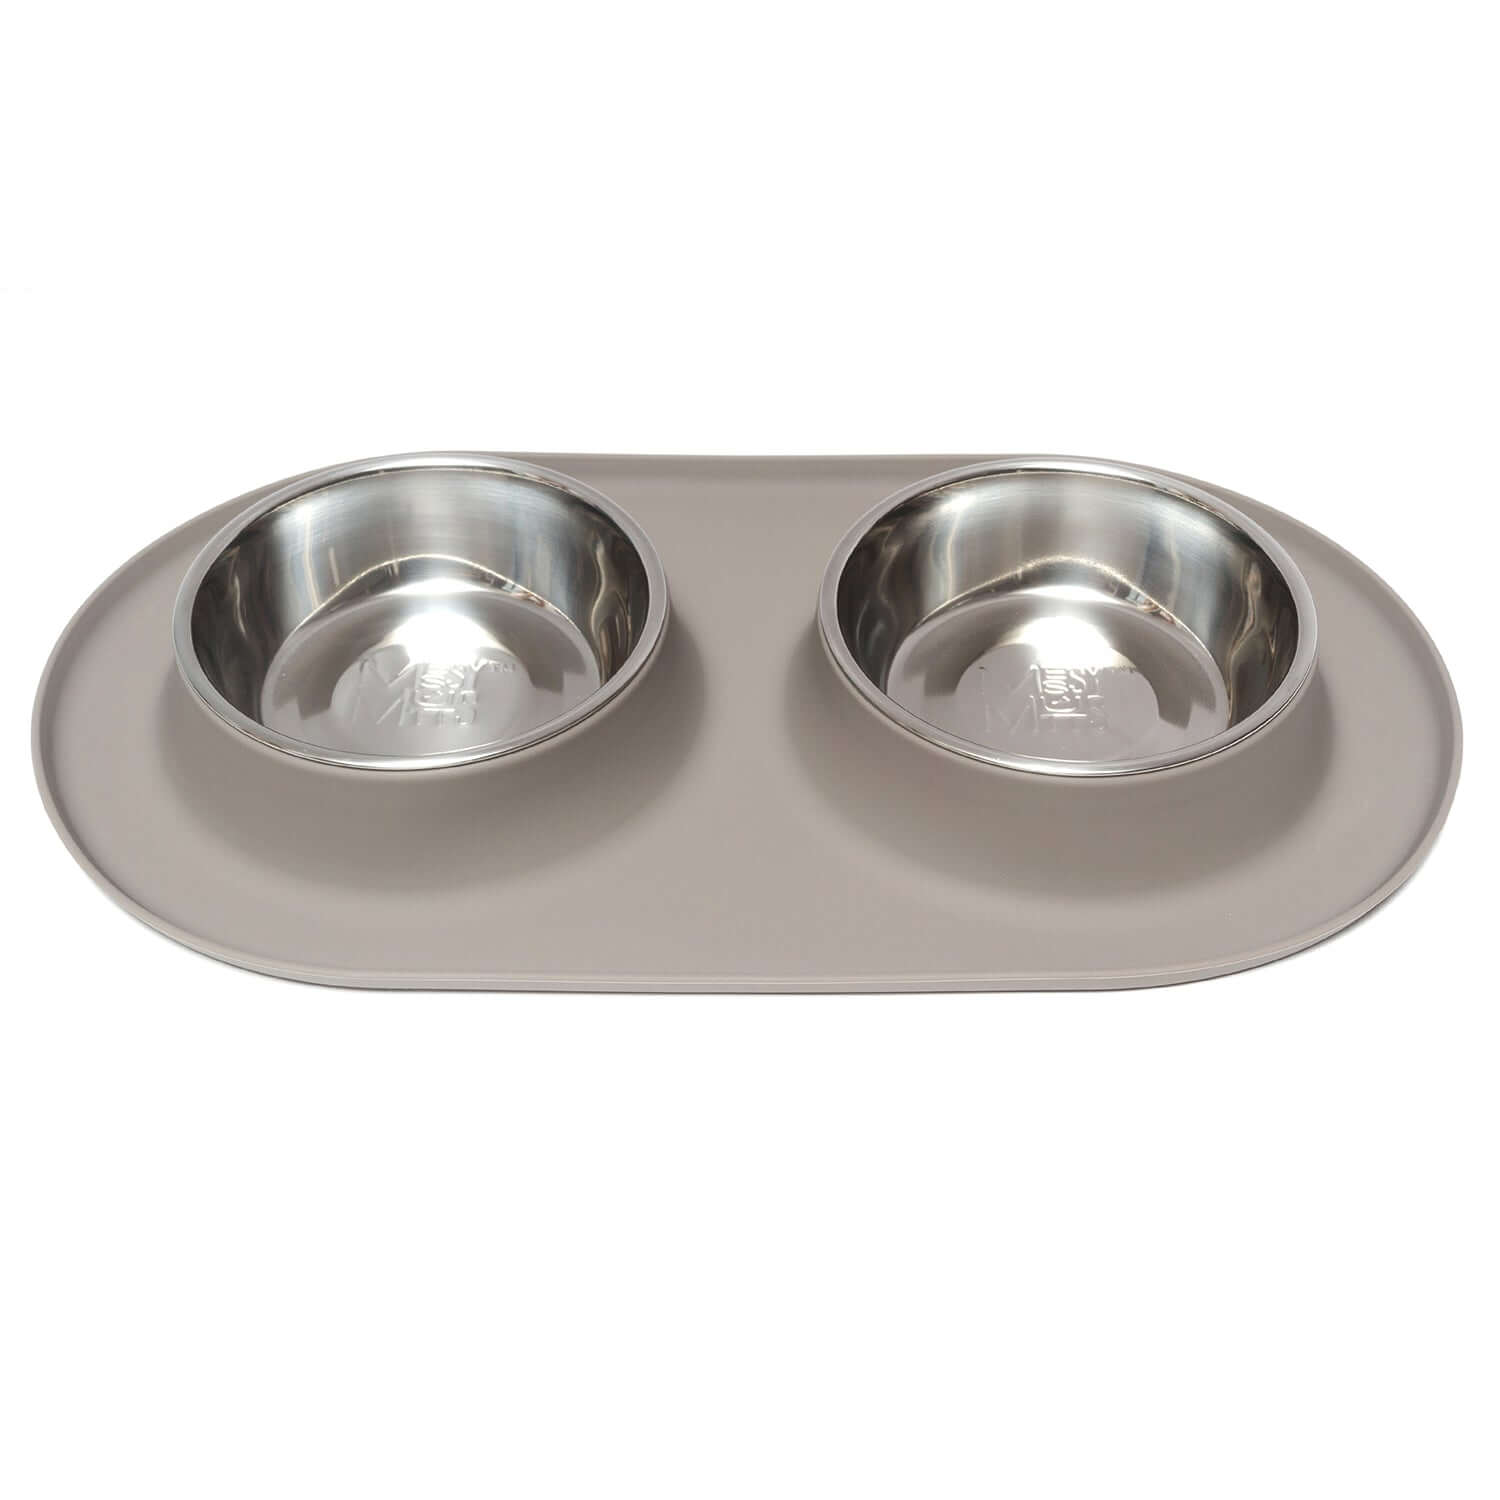 Grey silicone  and stainless steel double dog diner